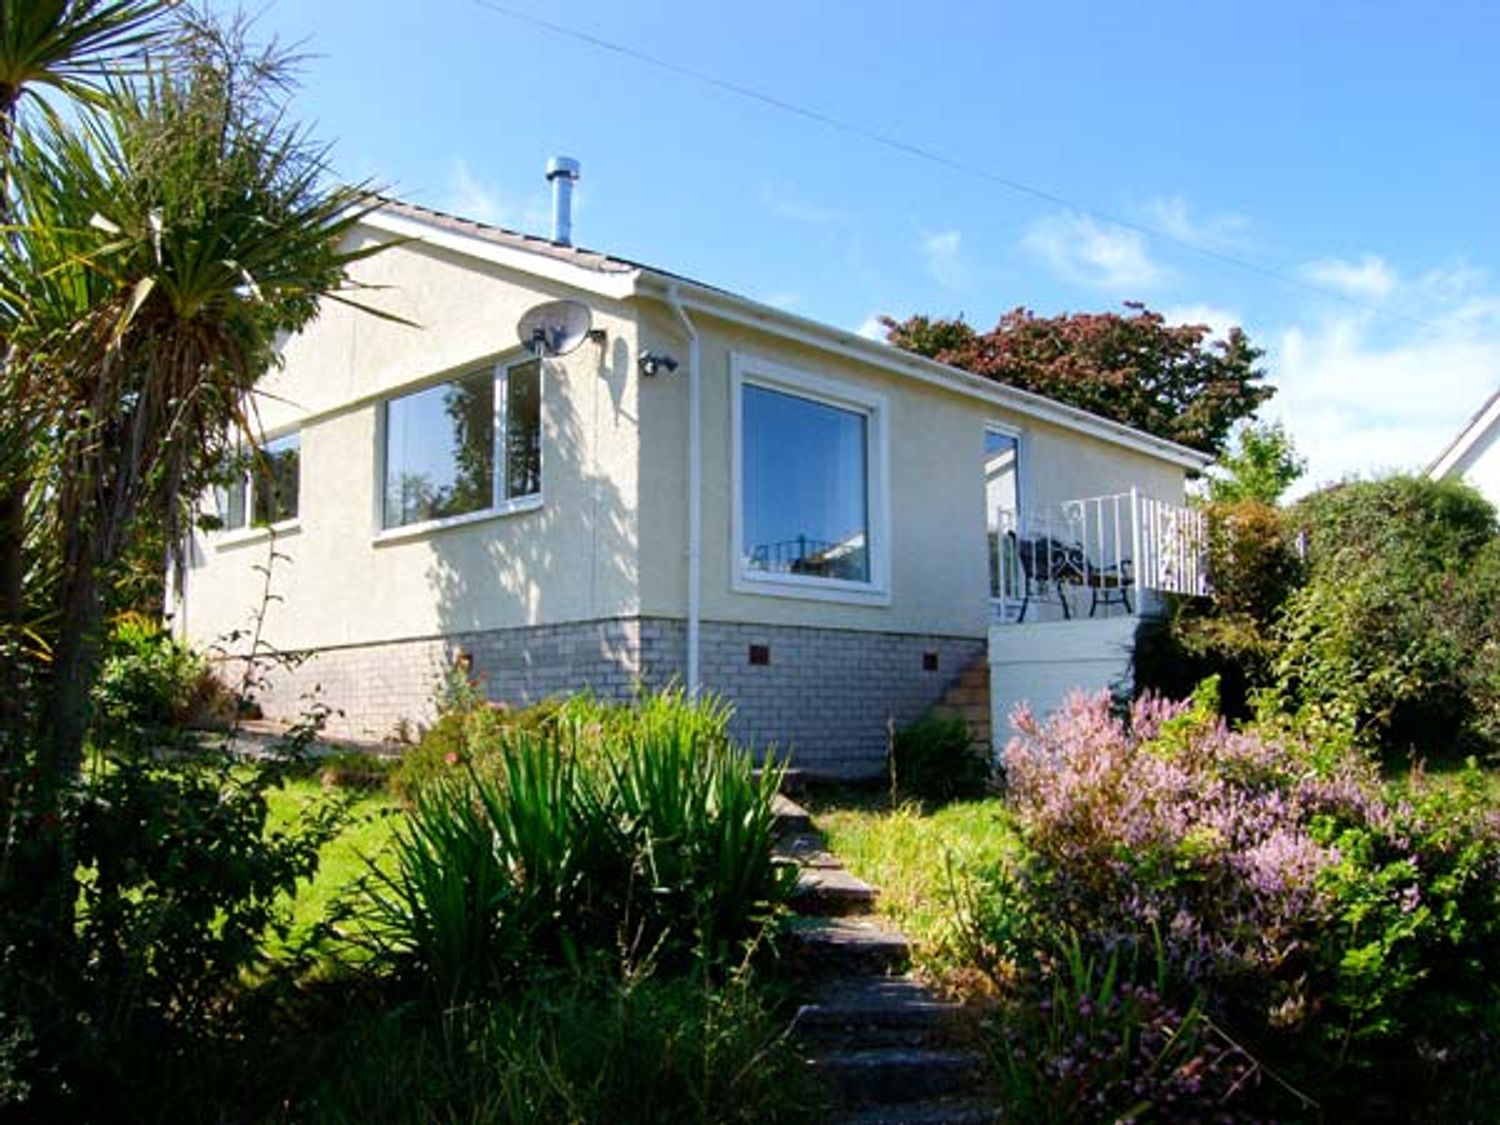 Sea View Cottage - Anglesey - 906524 - photo 1